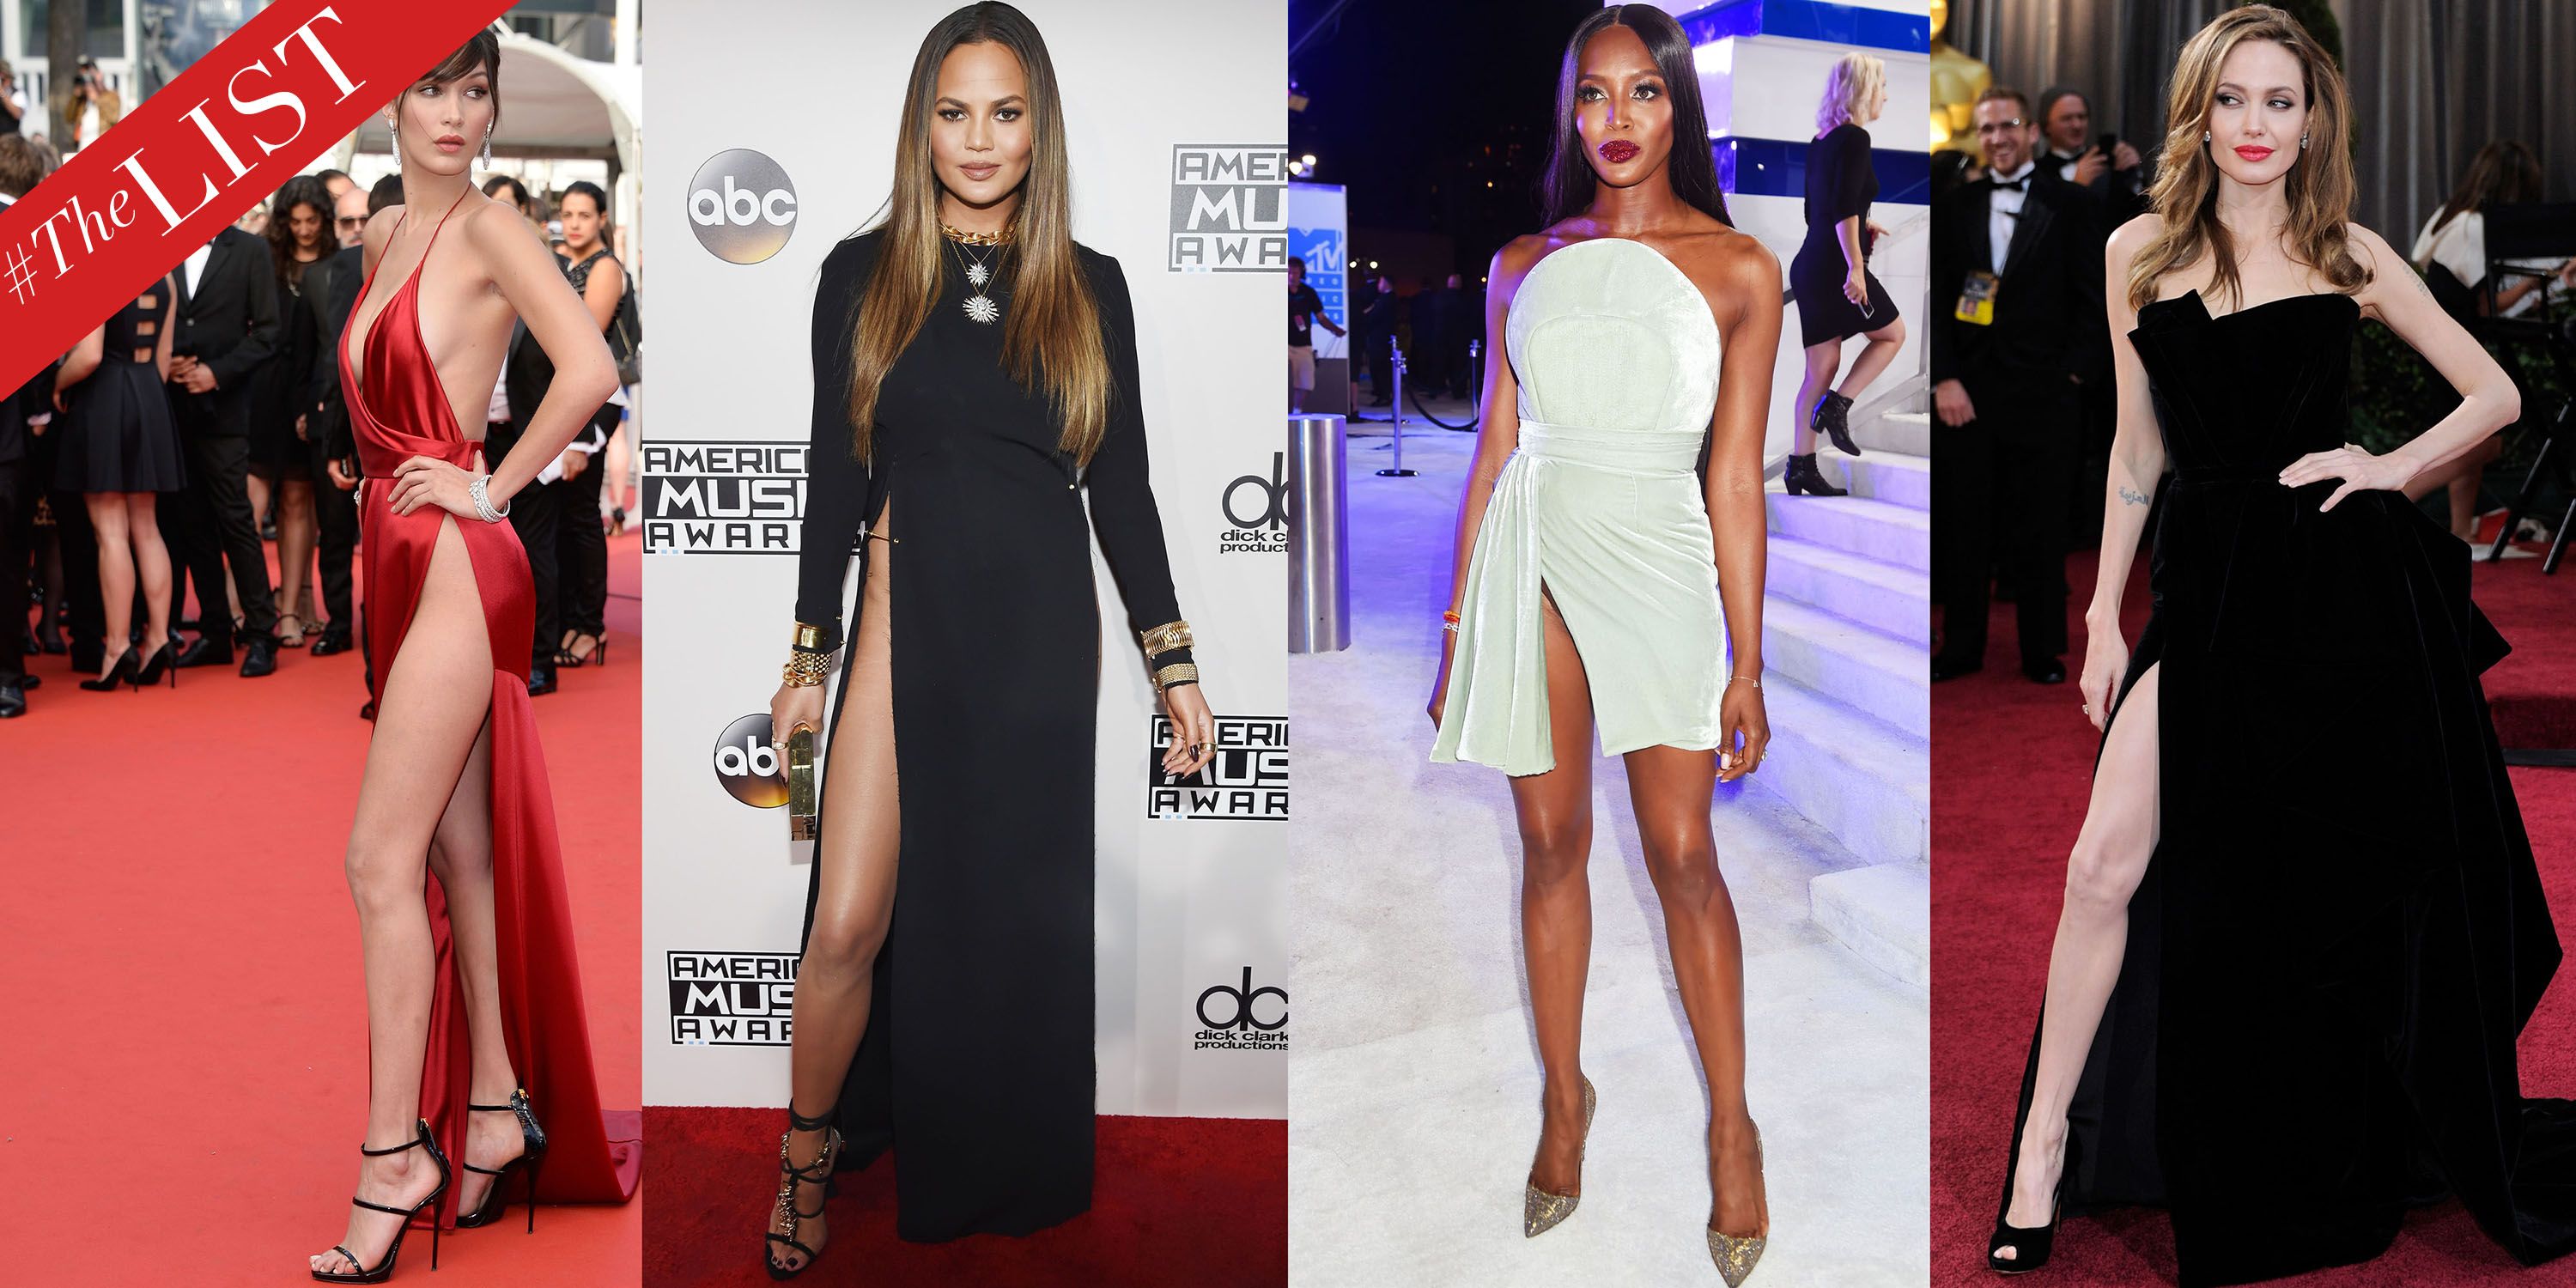 The Thigh-High Slit: A Do Or A Don't? | Glamour